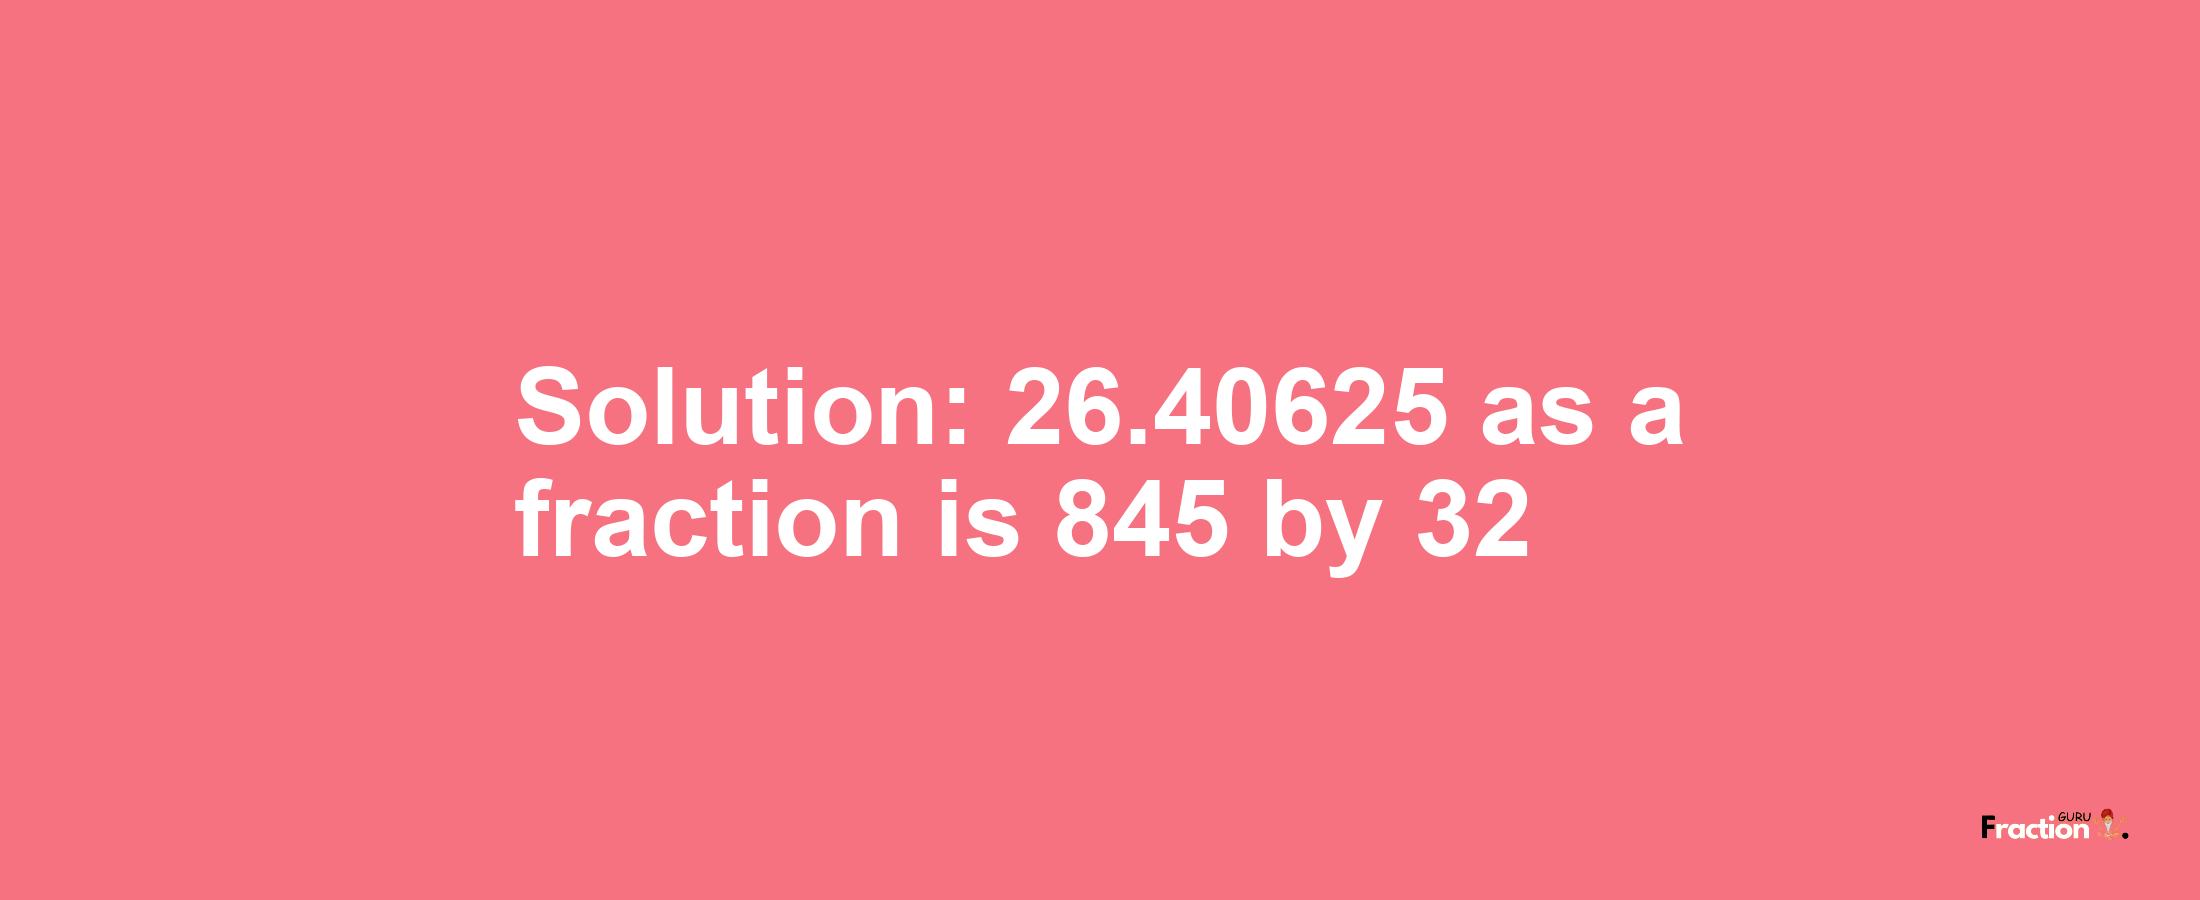 Solution:26.40625 as a fraction is 845/32